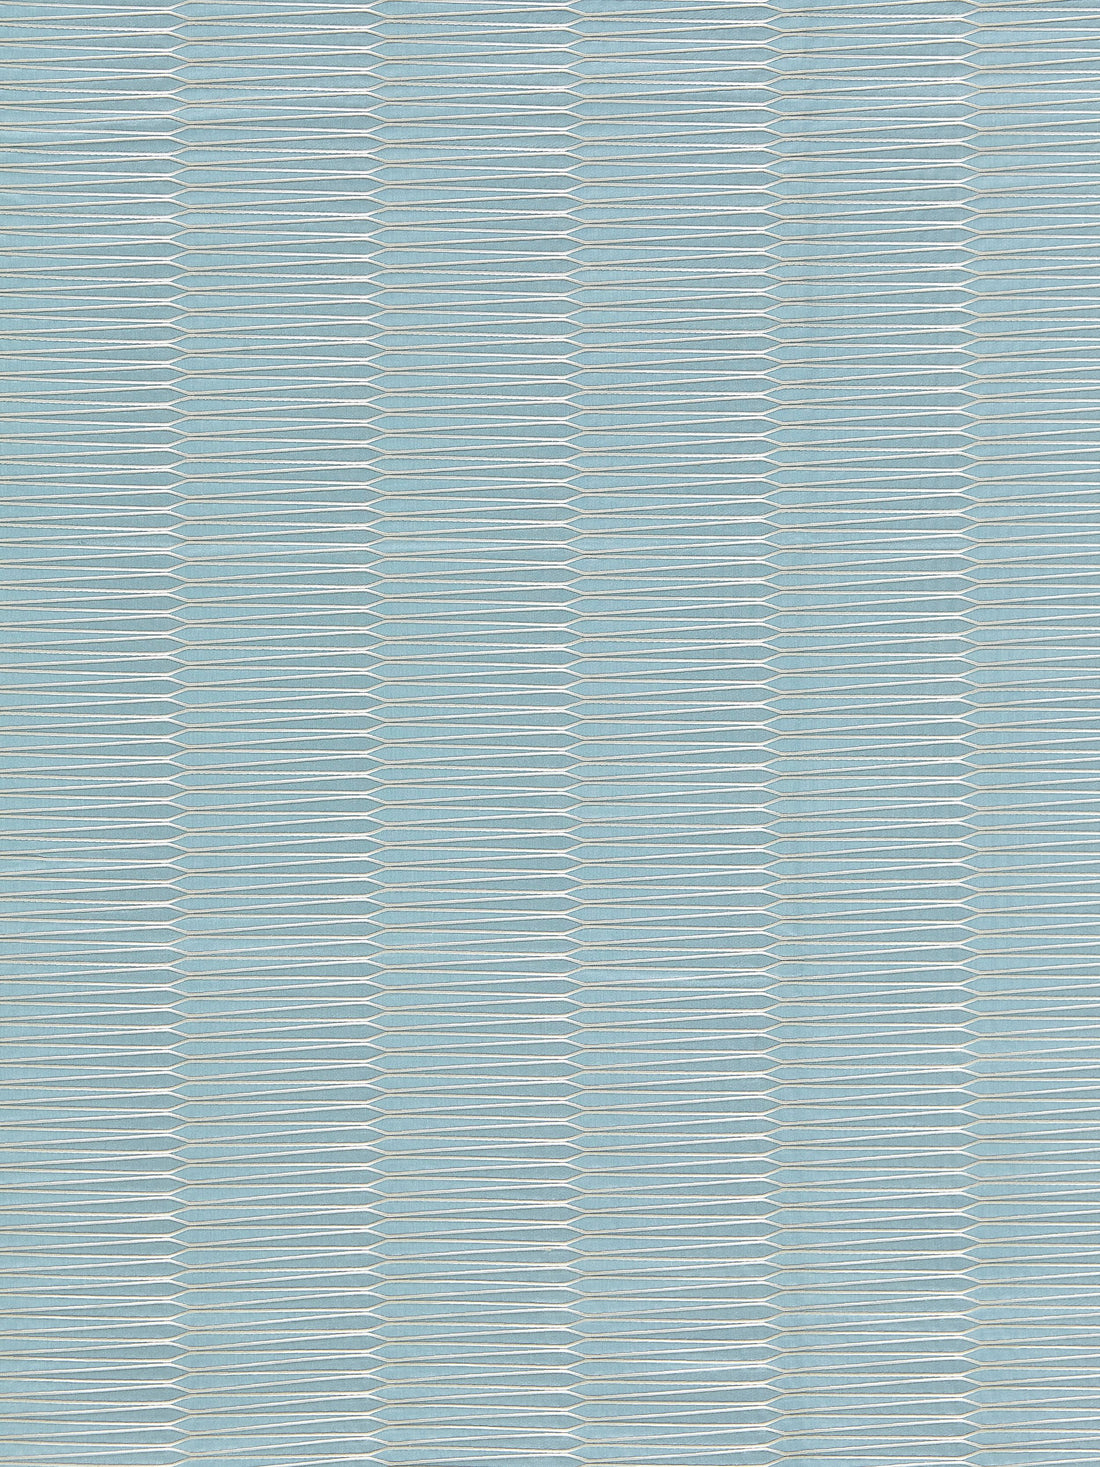 Wavelength fabric in mineral color - pattern number SC 000227141 - by Scalamandre in the Scalamandre Fabrics Book 1 collection